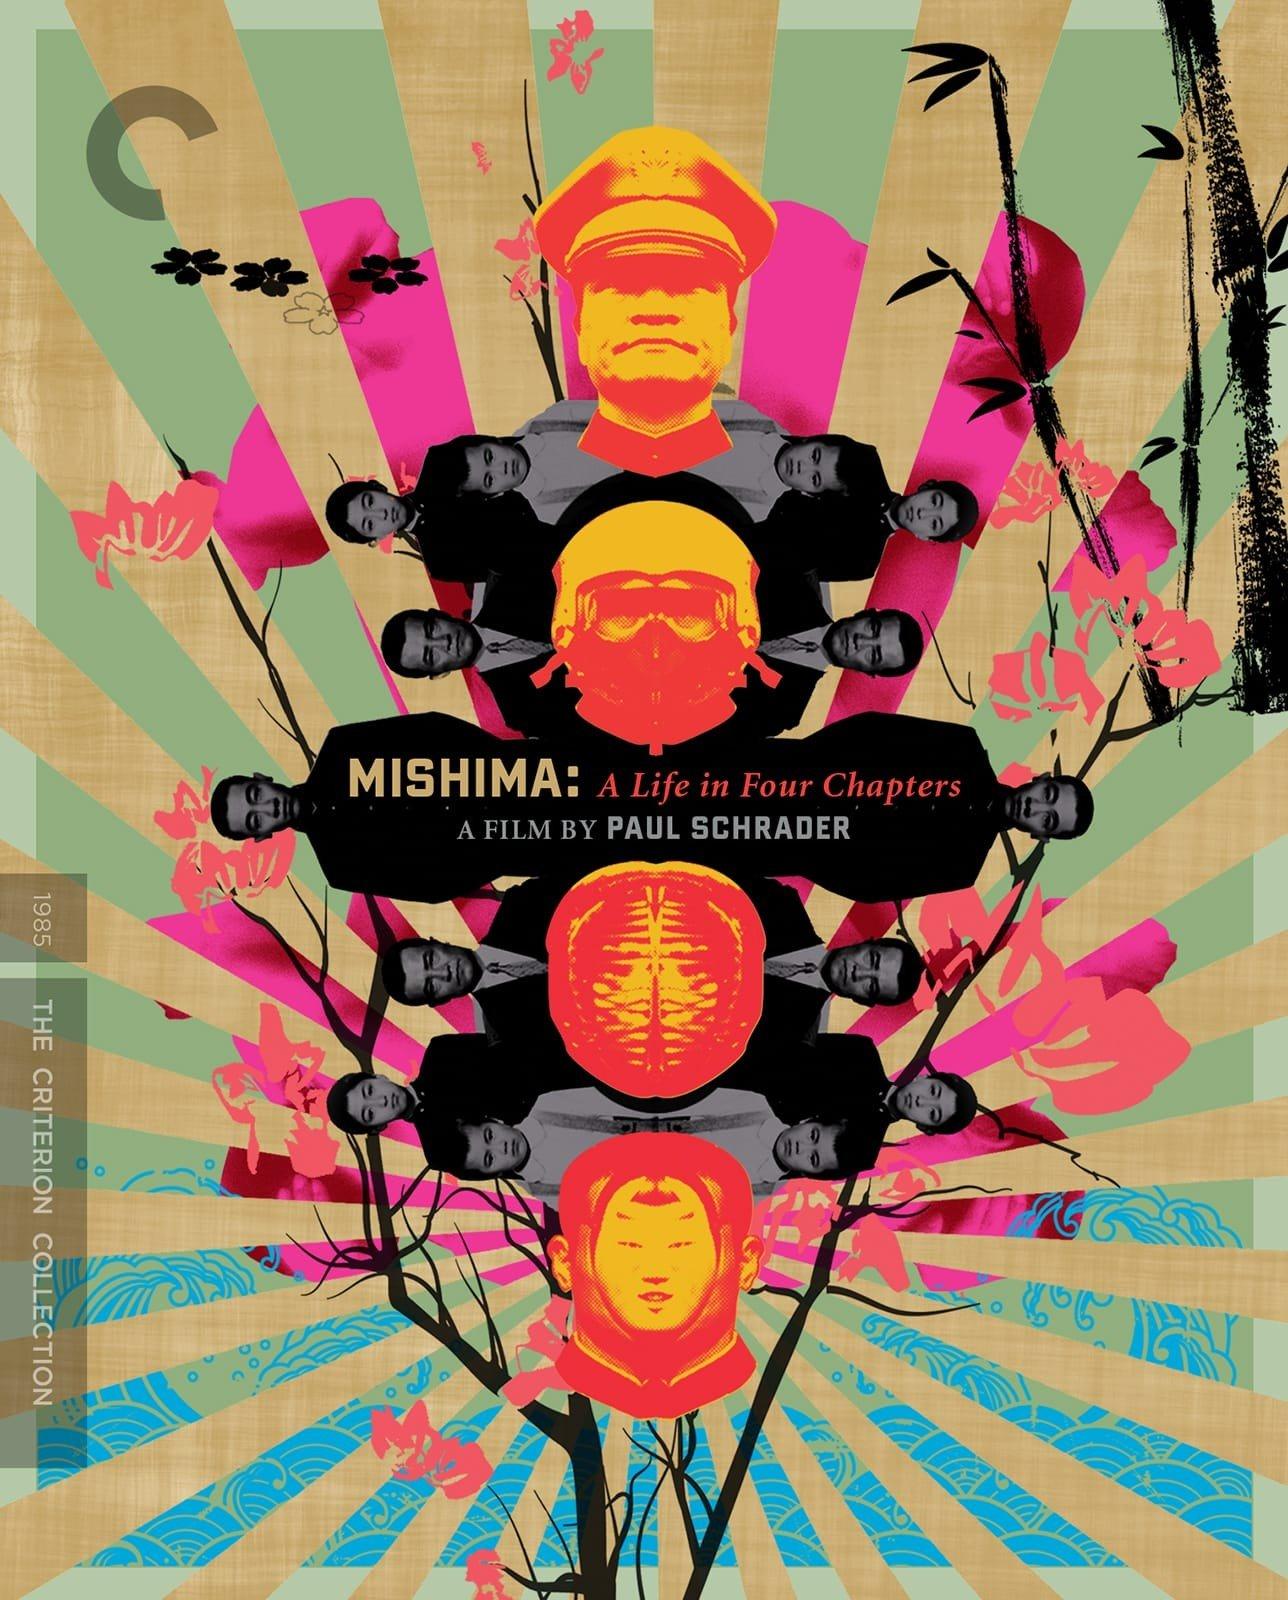 Poster phim Mishima: A Life in Four Chapters (1985) (Ảnh: Internet)